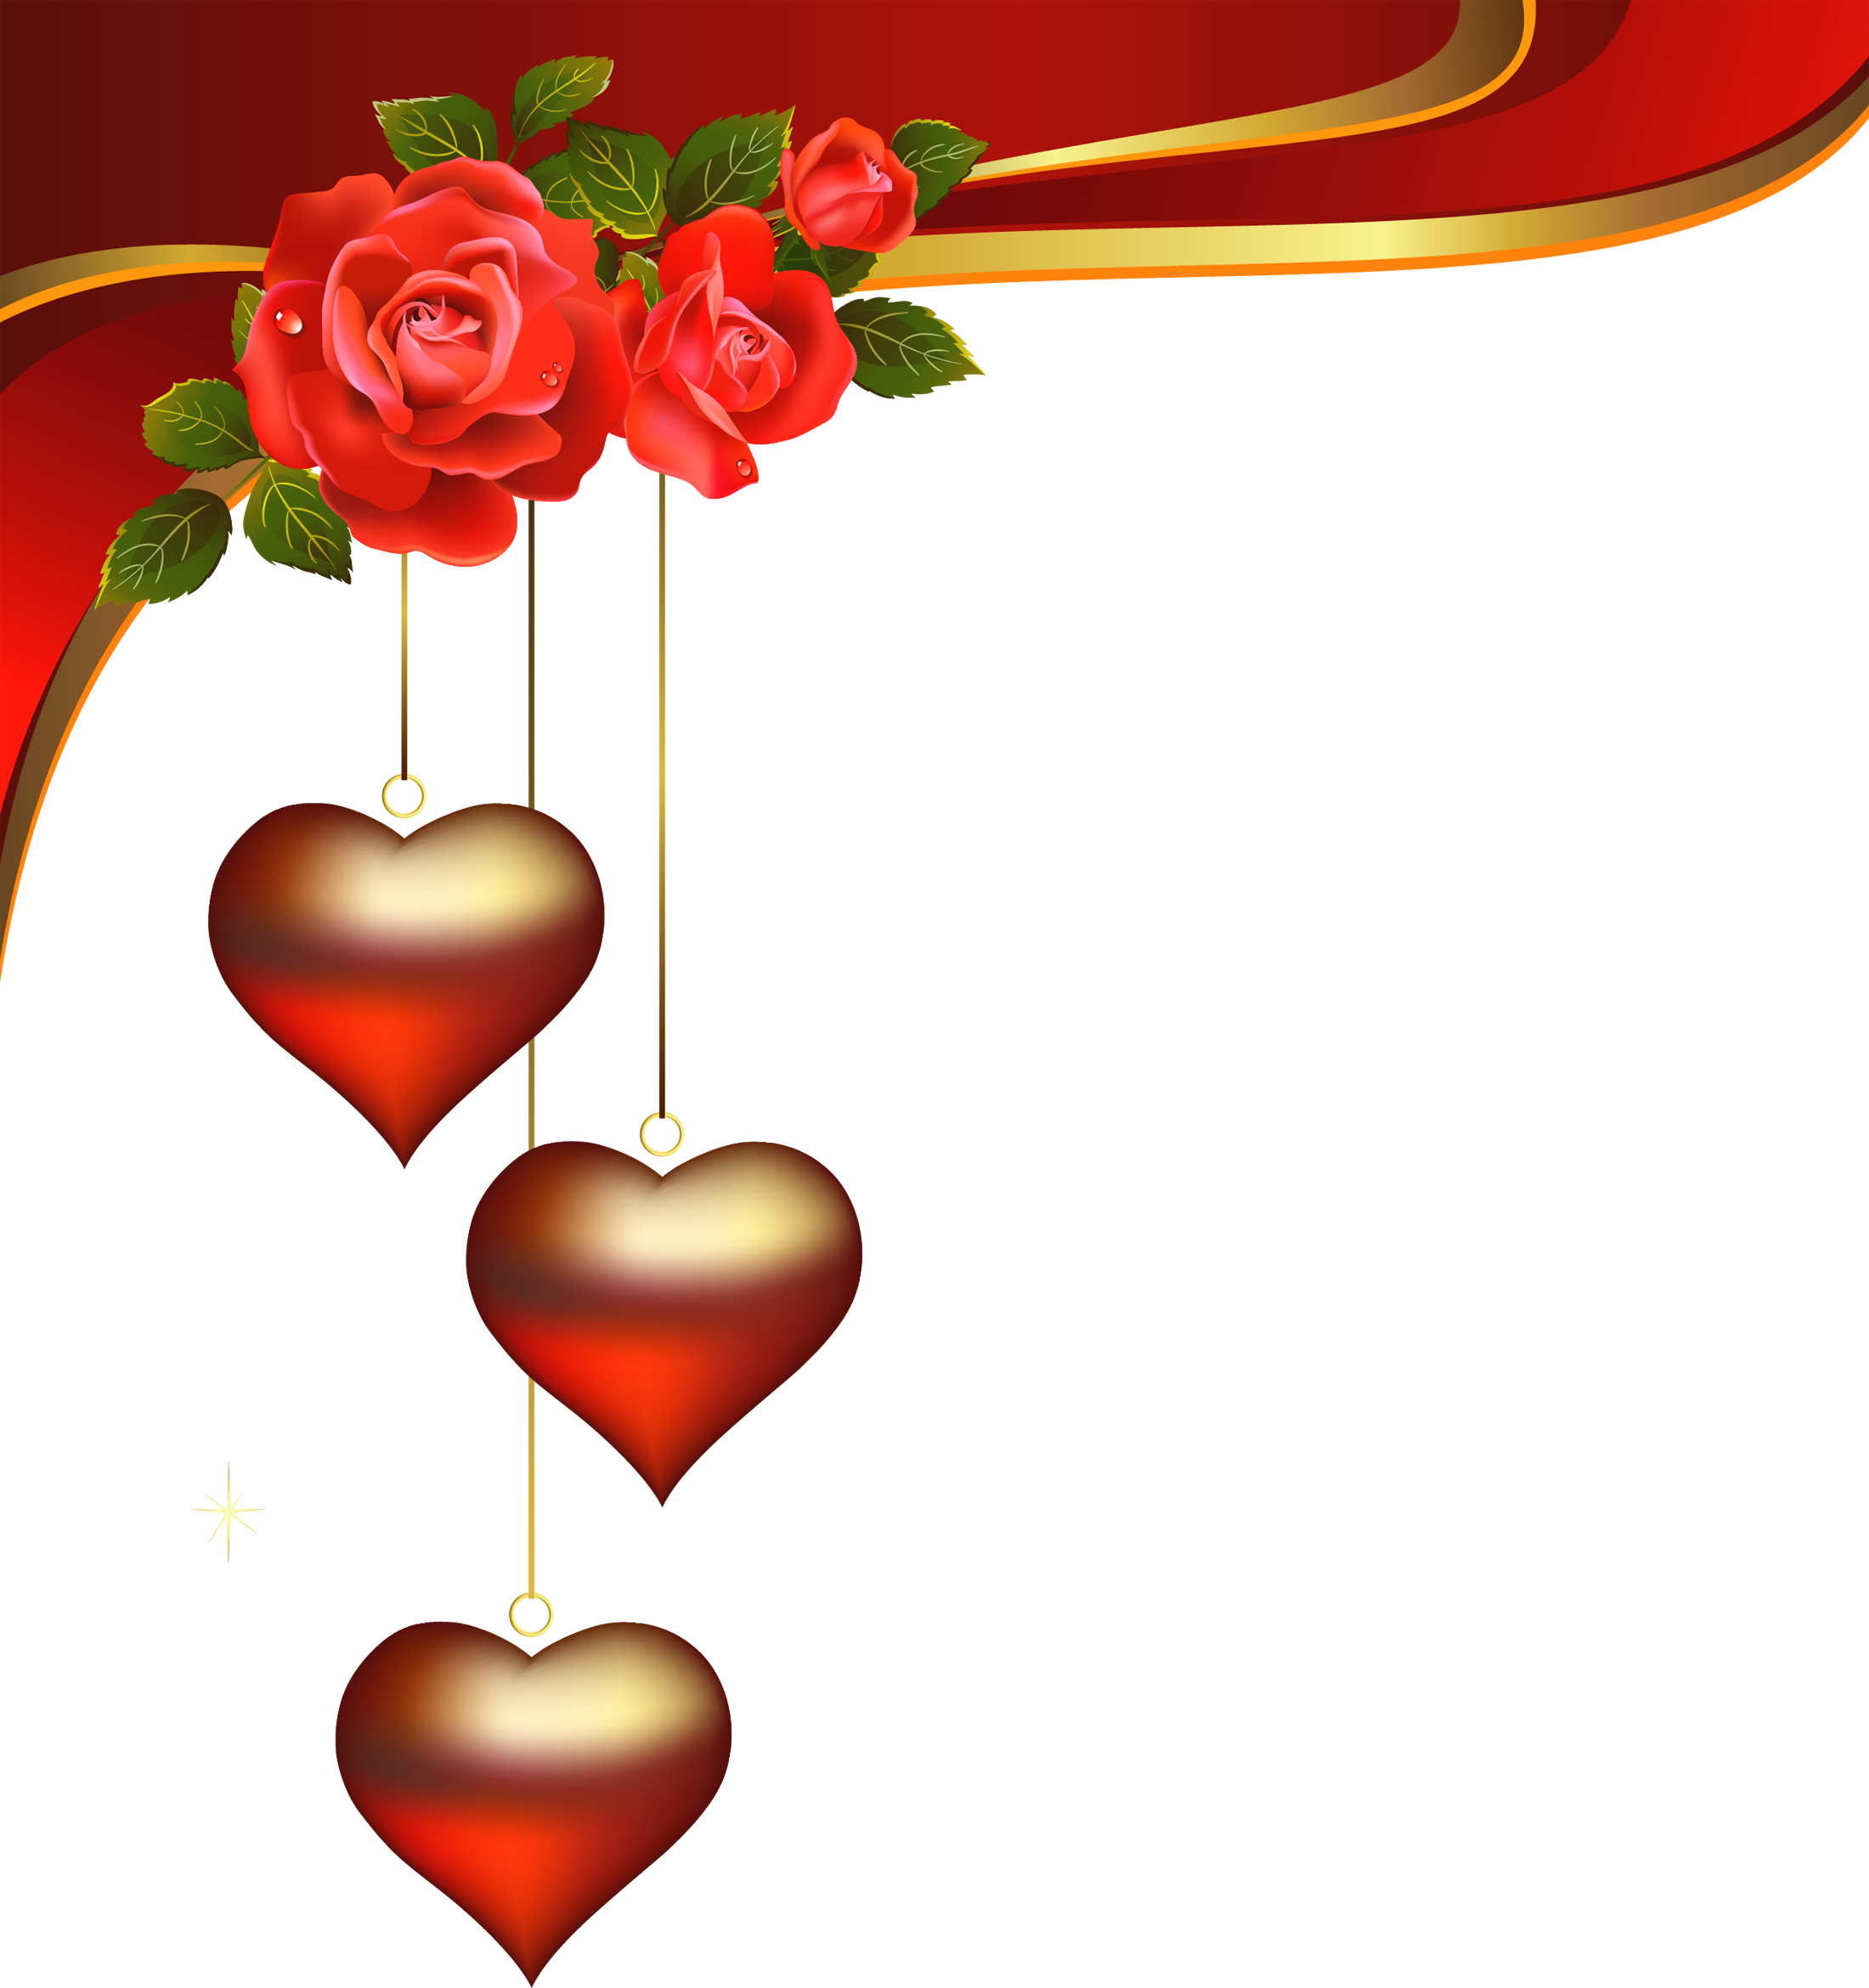 Free Wedding Images Png, Download Free Wedding Images Png png images